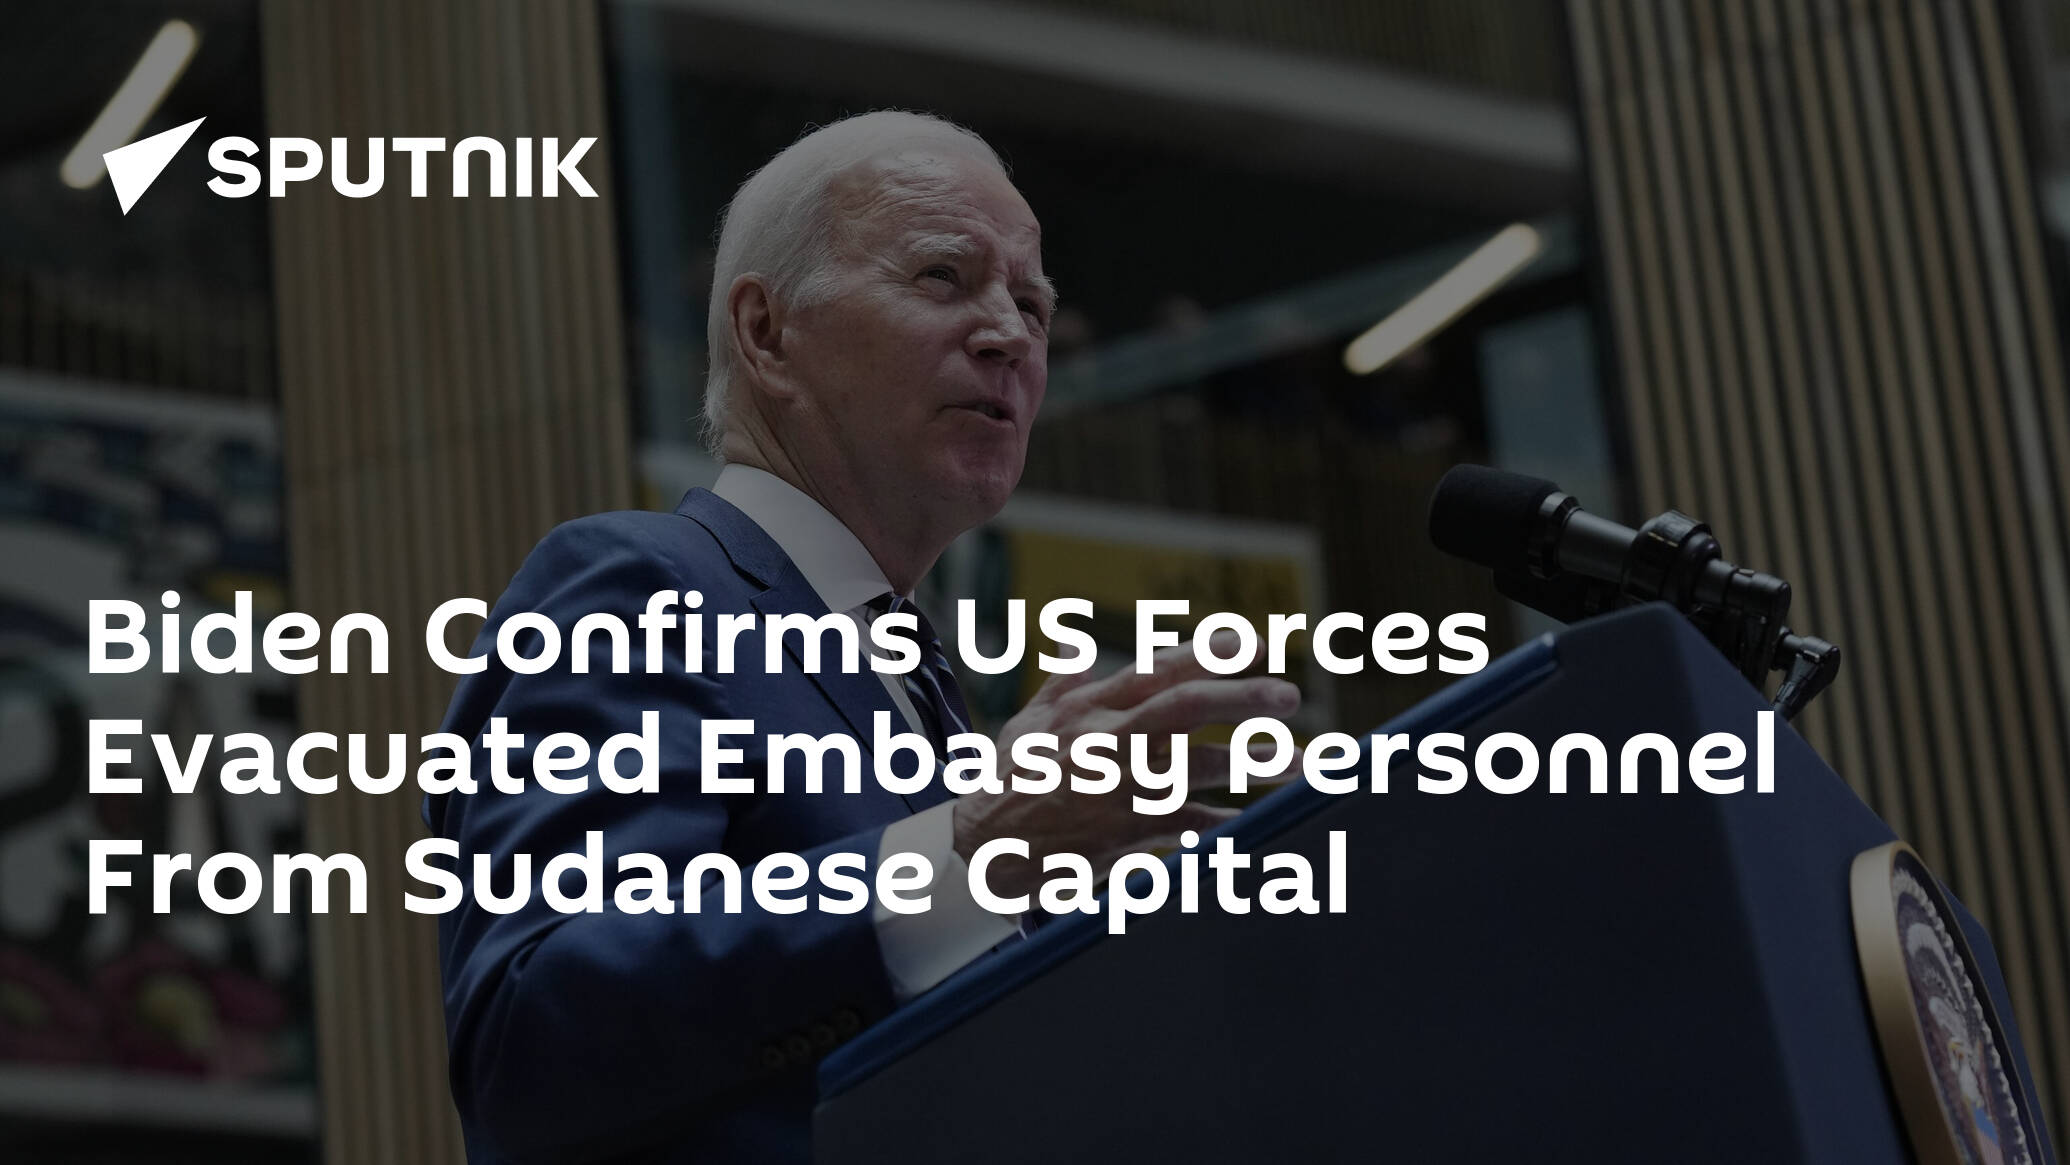 Biden Confirms US Forces Evacuated Embassy Personnel From Sudanese Capital